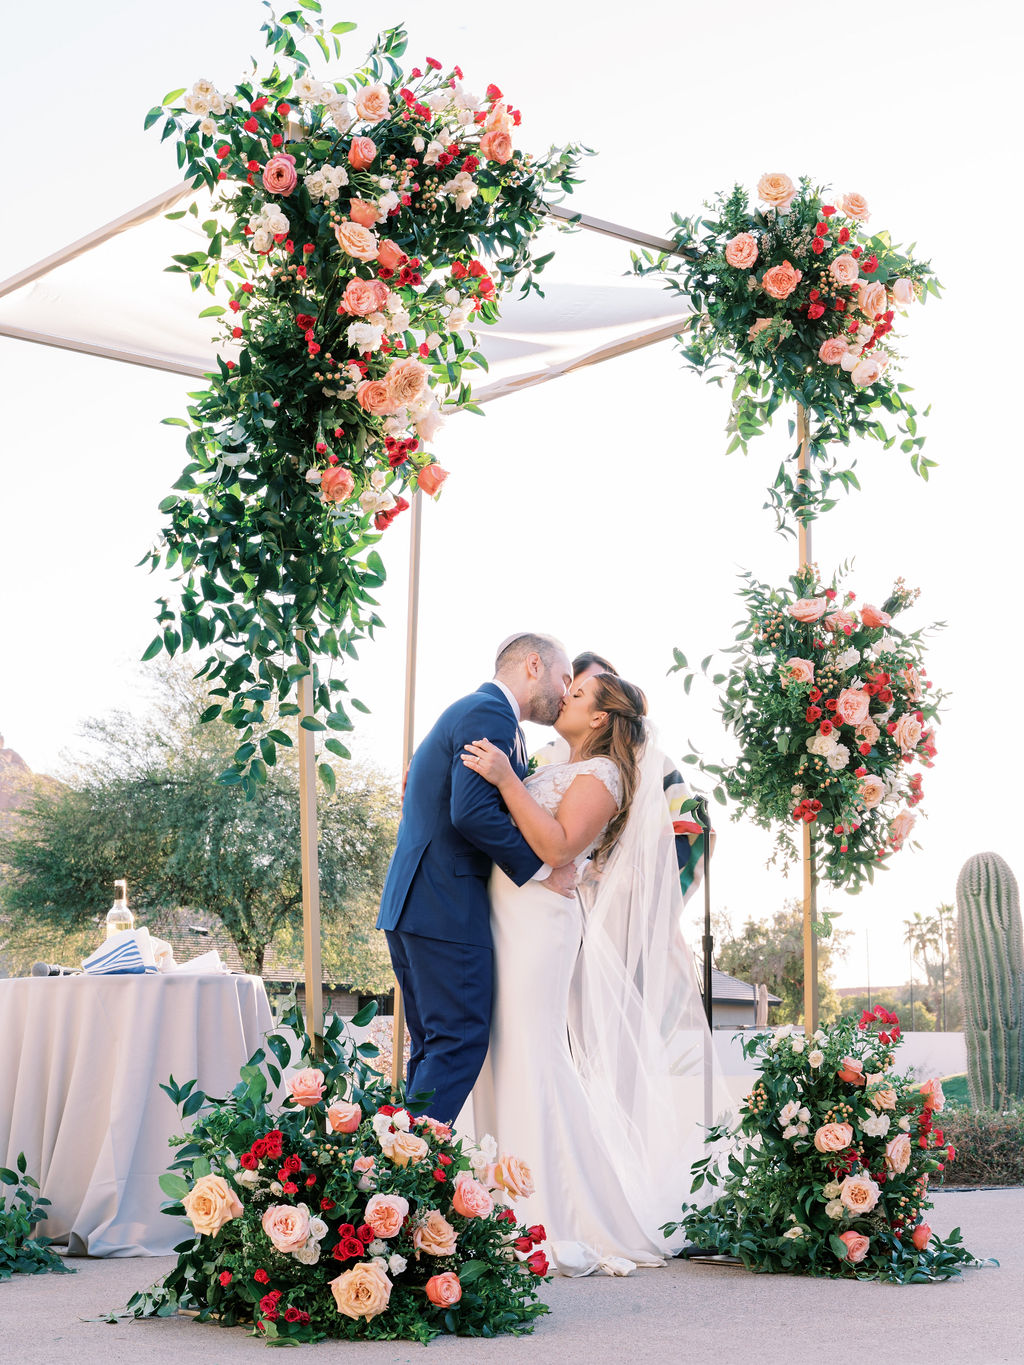 Bride and groom kissing under chuppah with floral installations of pink and peach flowers.